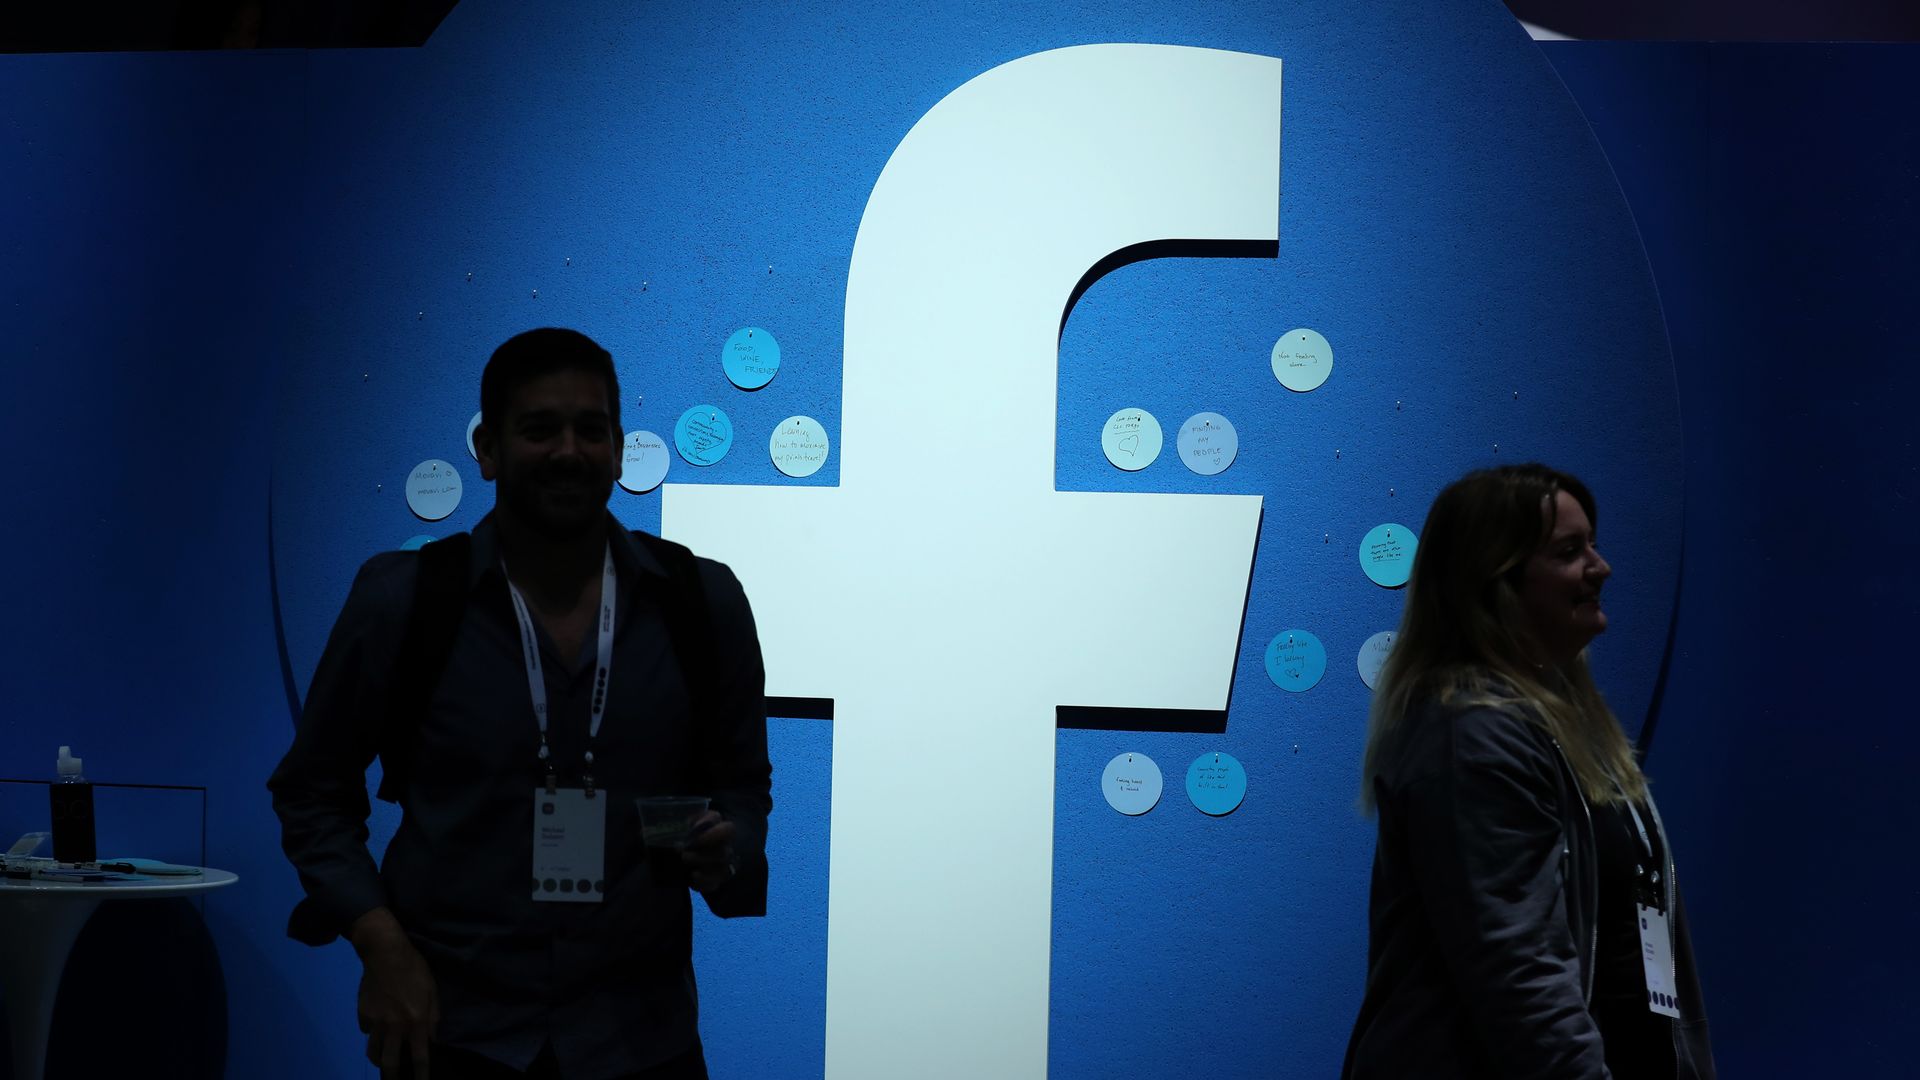 In this image, a man and a woman wearing event lanyards stand on either side of a large Facebook "F" logo.